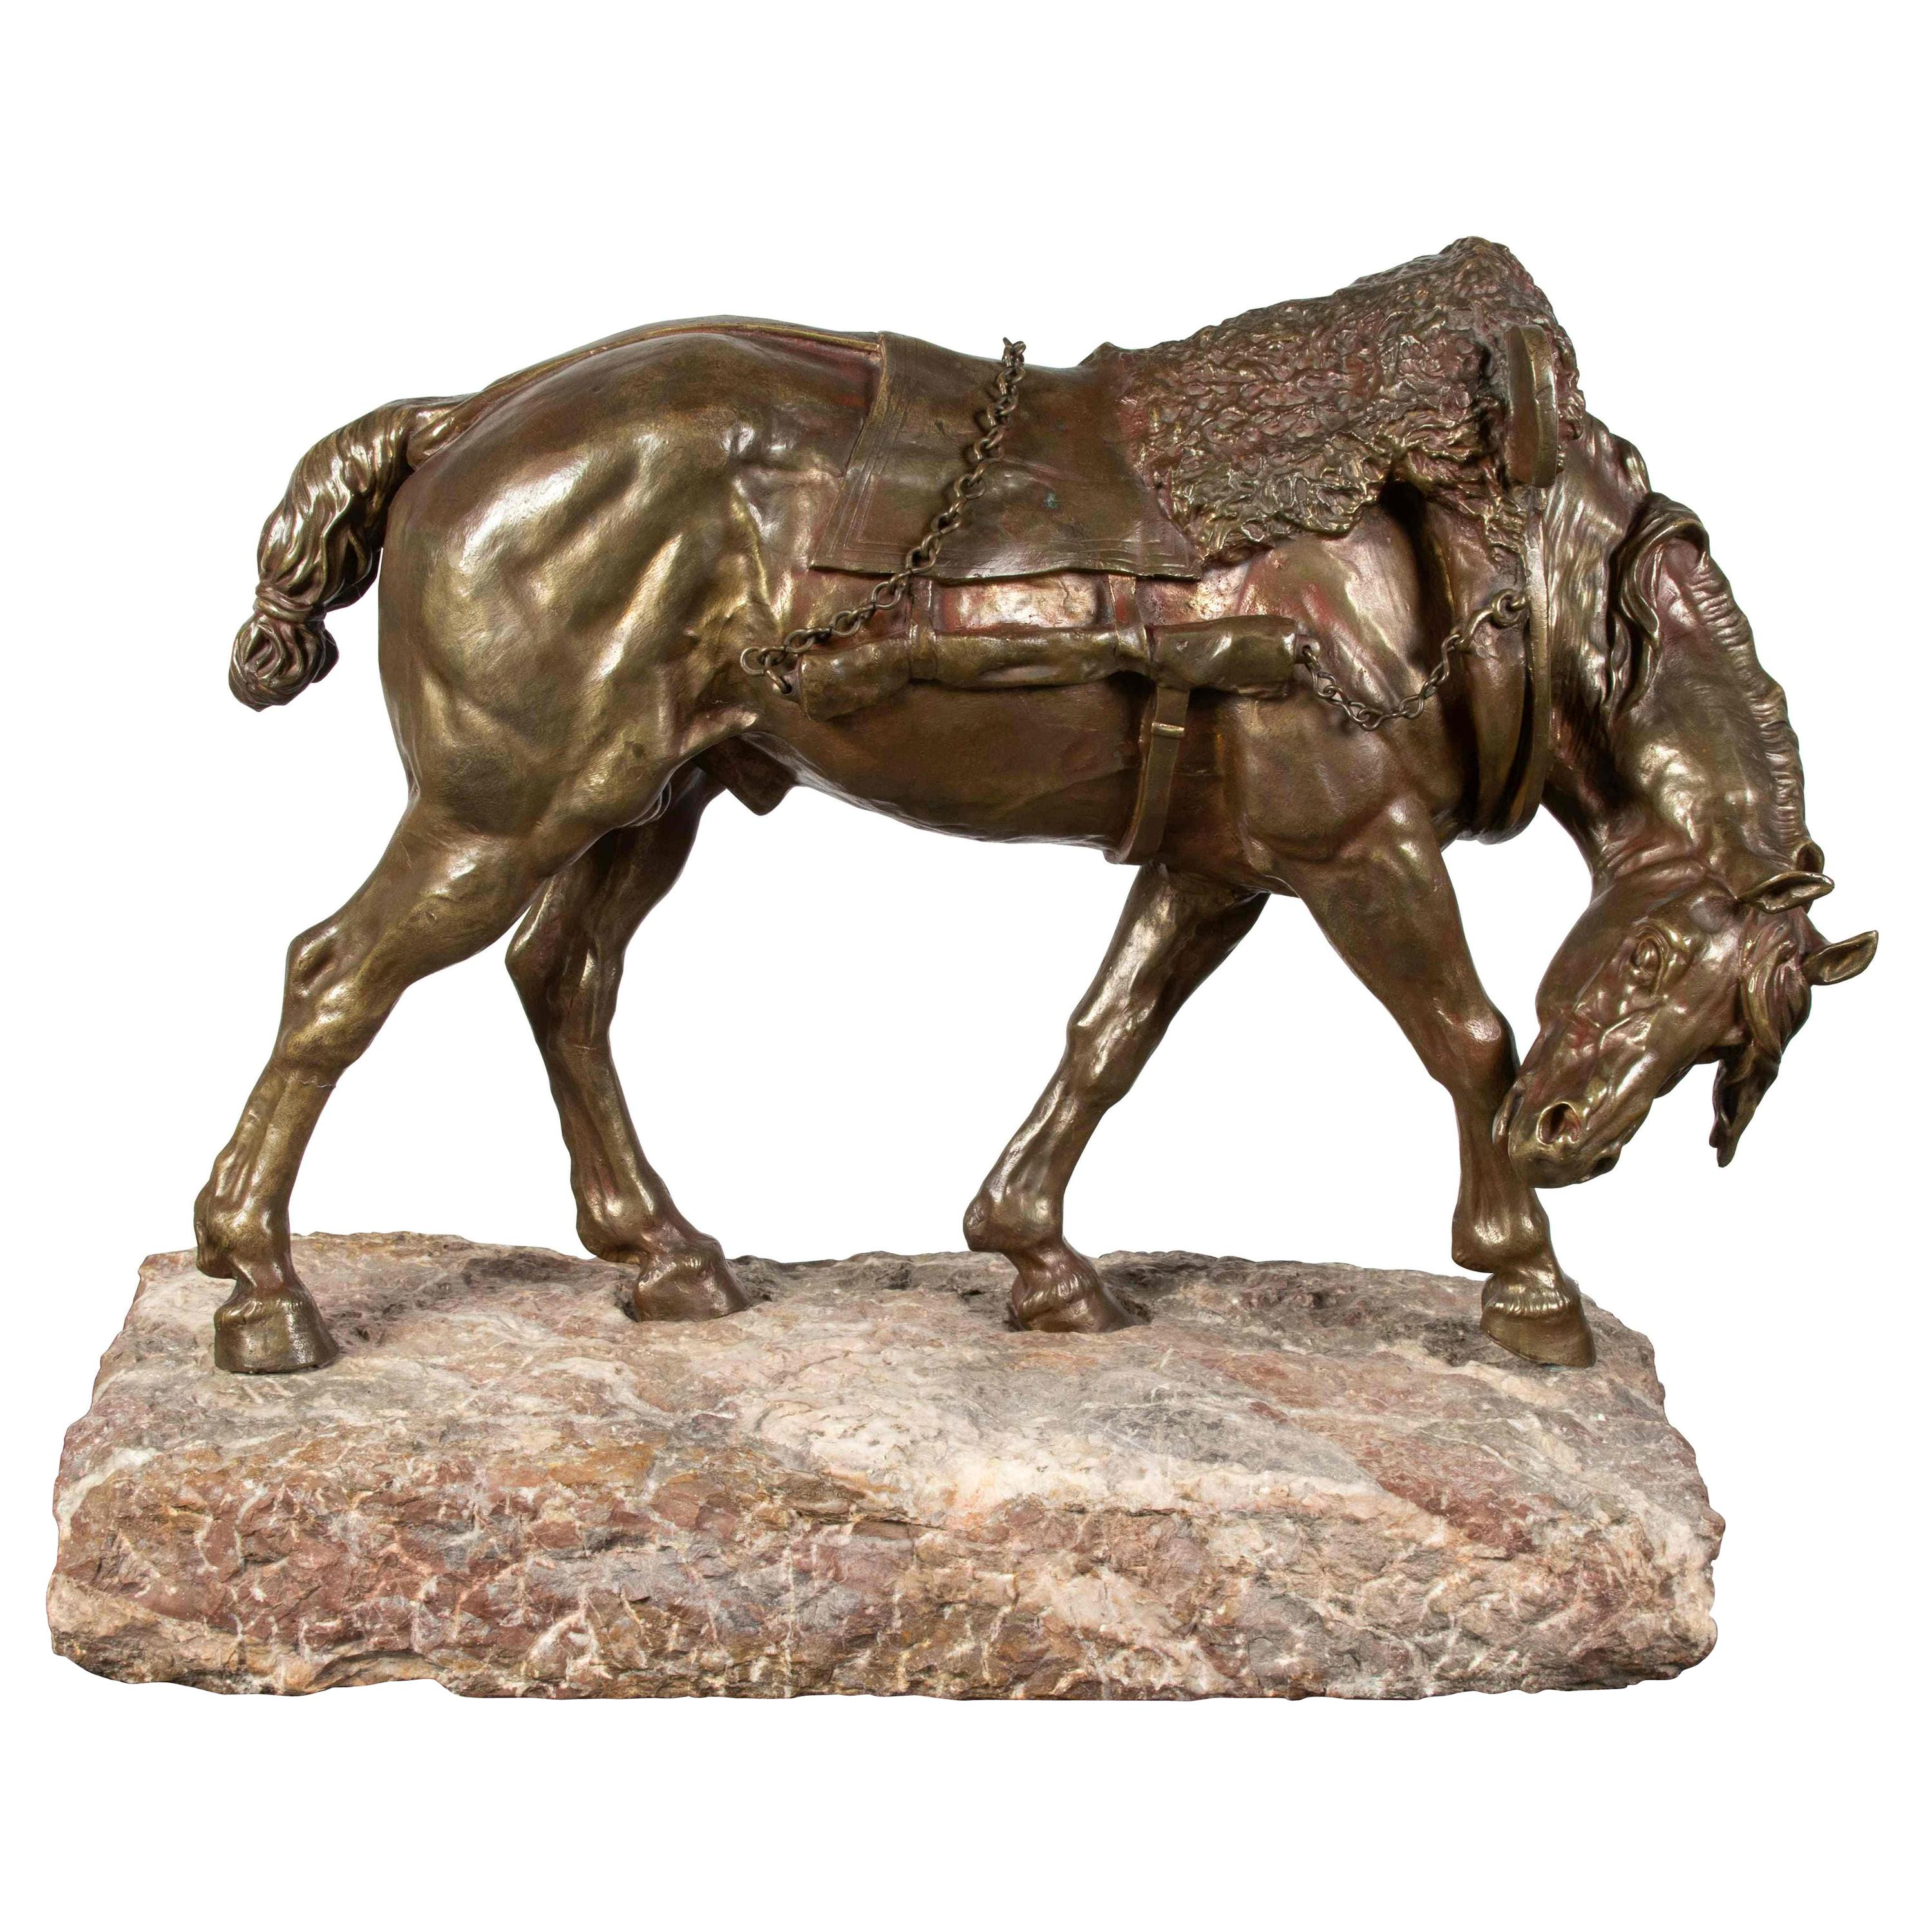 Bronze Sculpture "A Horse with Character" by Arthur Jacques Leduc